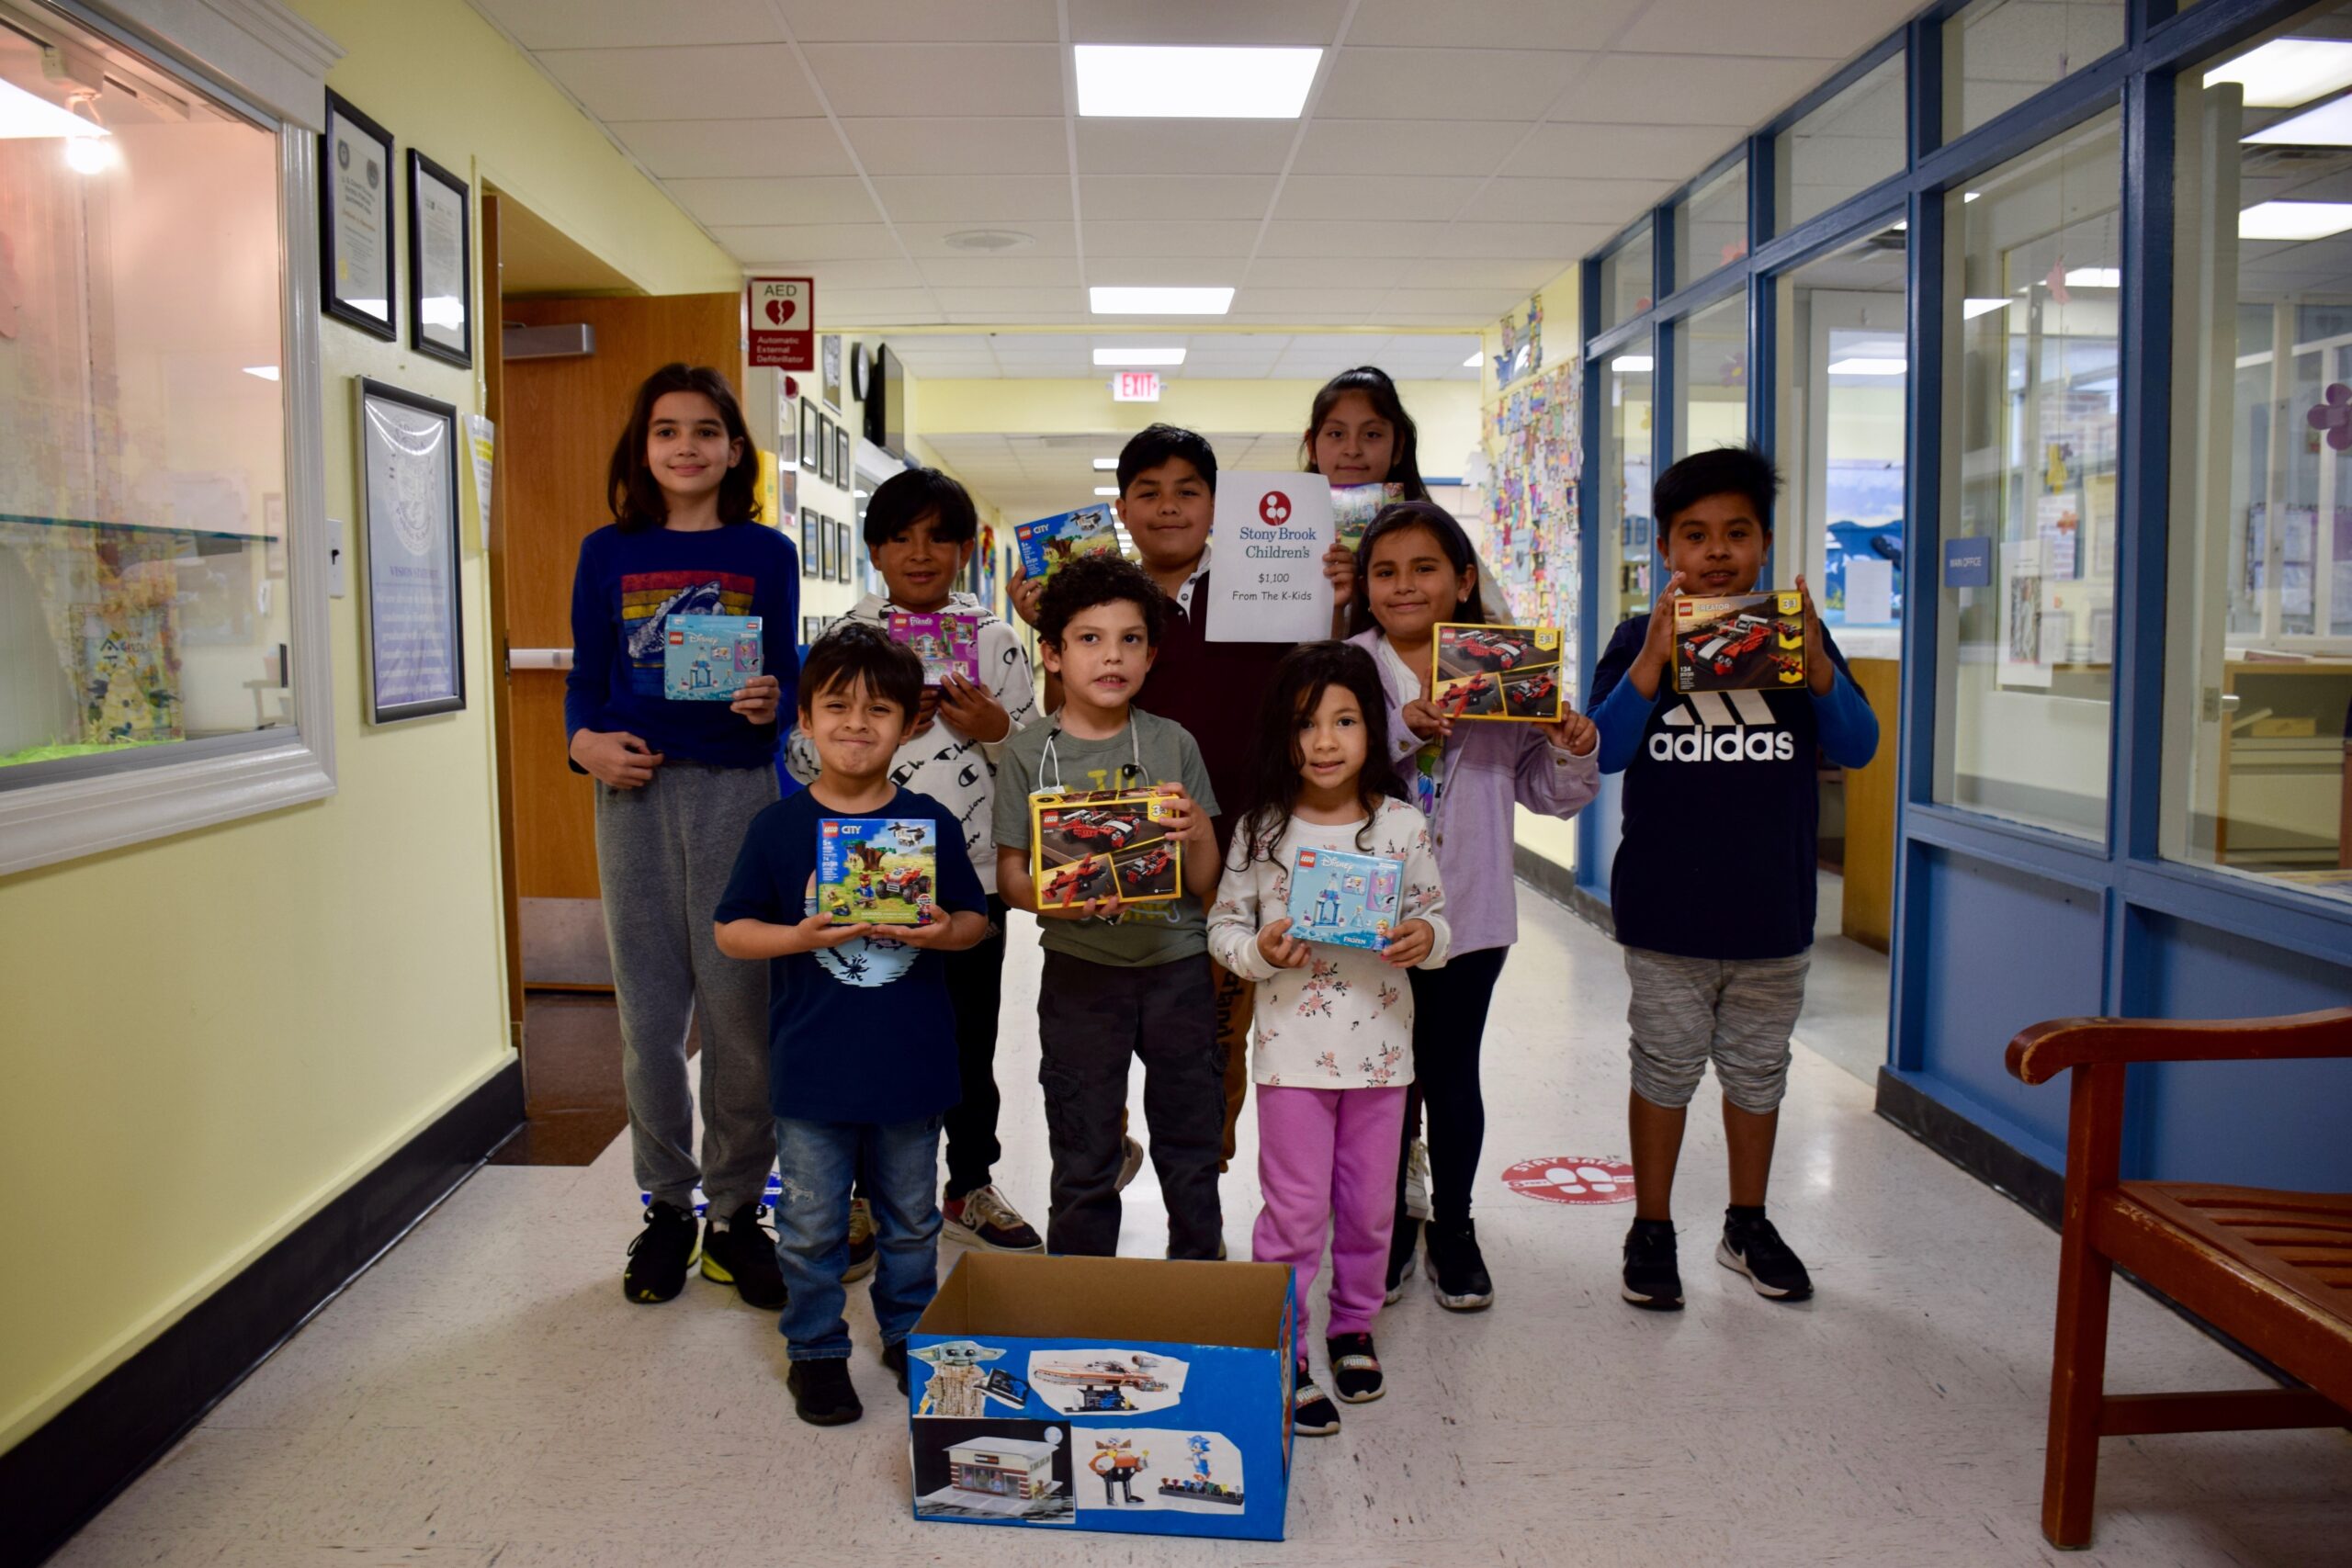 The Hampton Bays Elementary School service club K-Kids recently donated $1,100 to Stony Brook Children’s Hospital. To raise the funds, the students sold emoji key chains during their lunch periods. They also collected Lego building kits to donate. The fundraiser is just one of several that the K-Kids have participated in this year. They also raised money for breast cancer, autism awareness and the Ronald McDonald House.